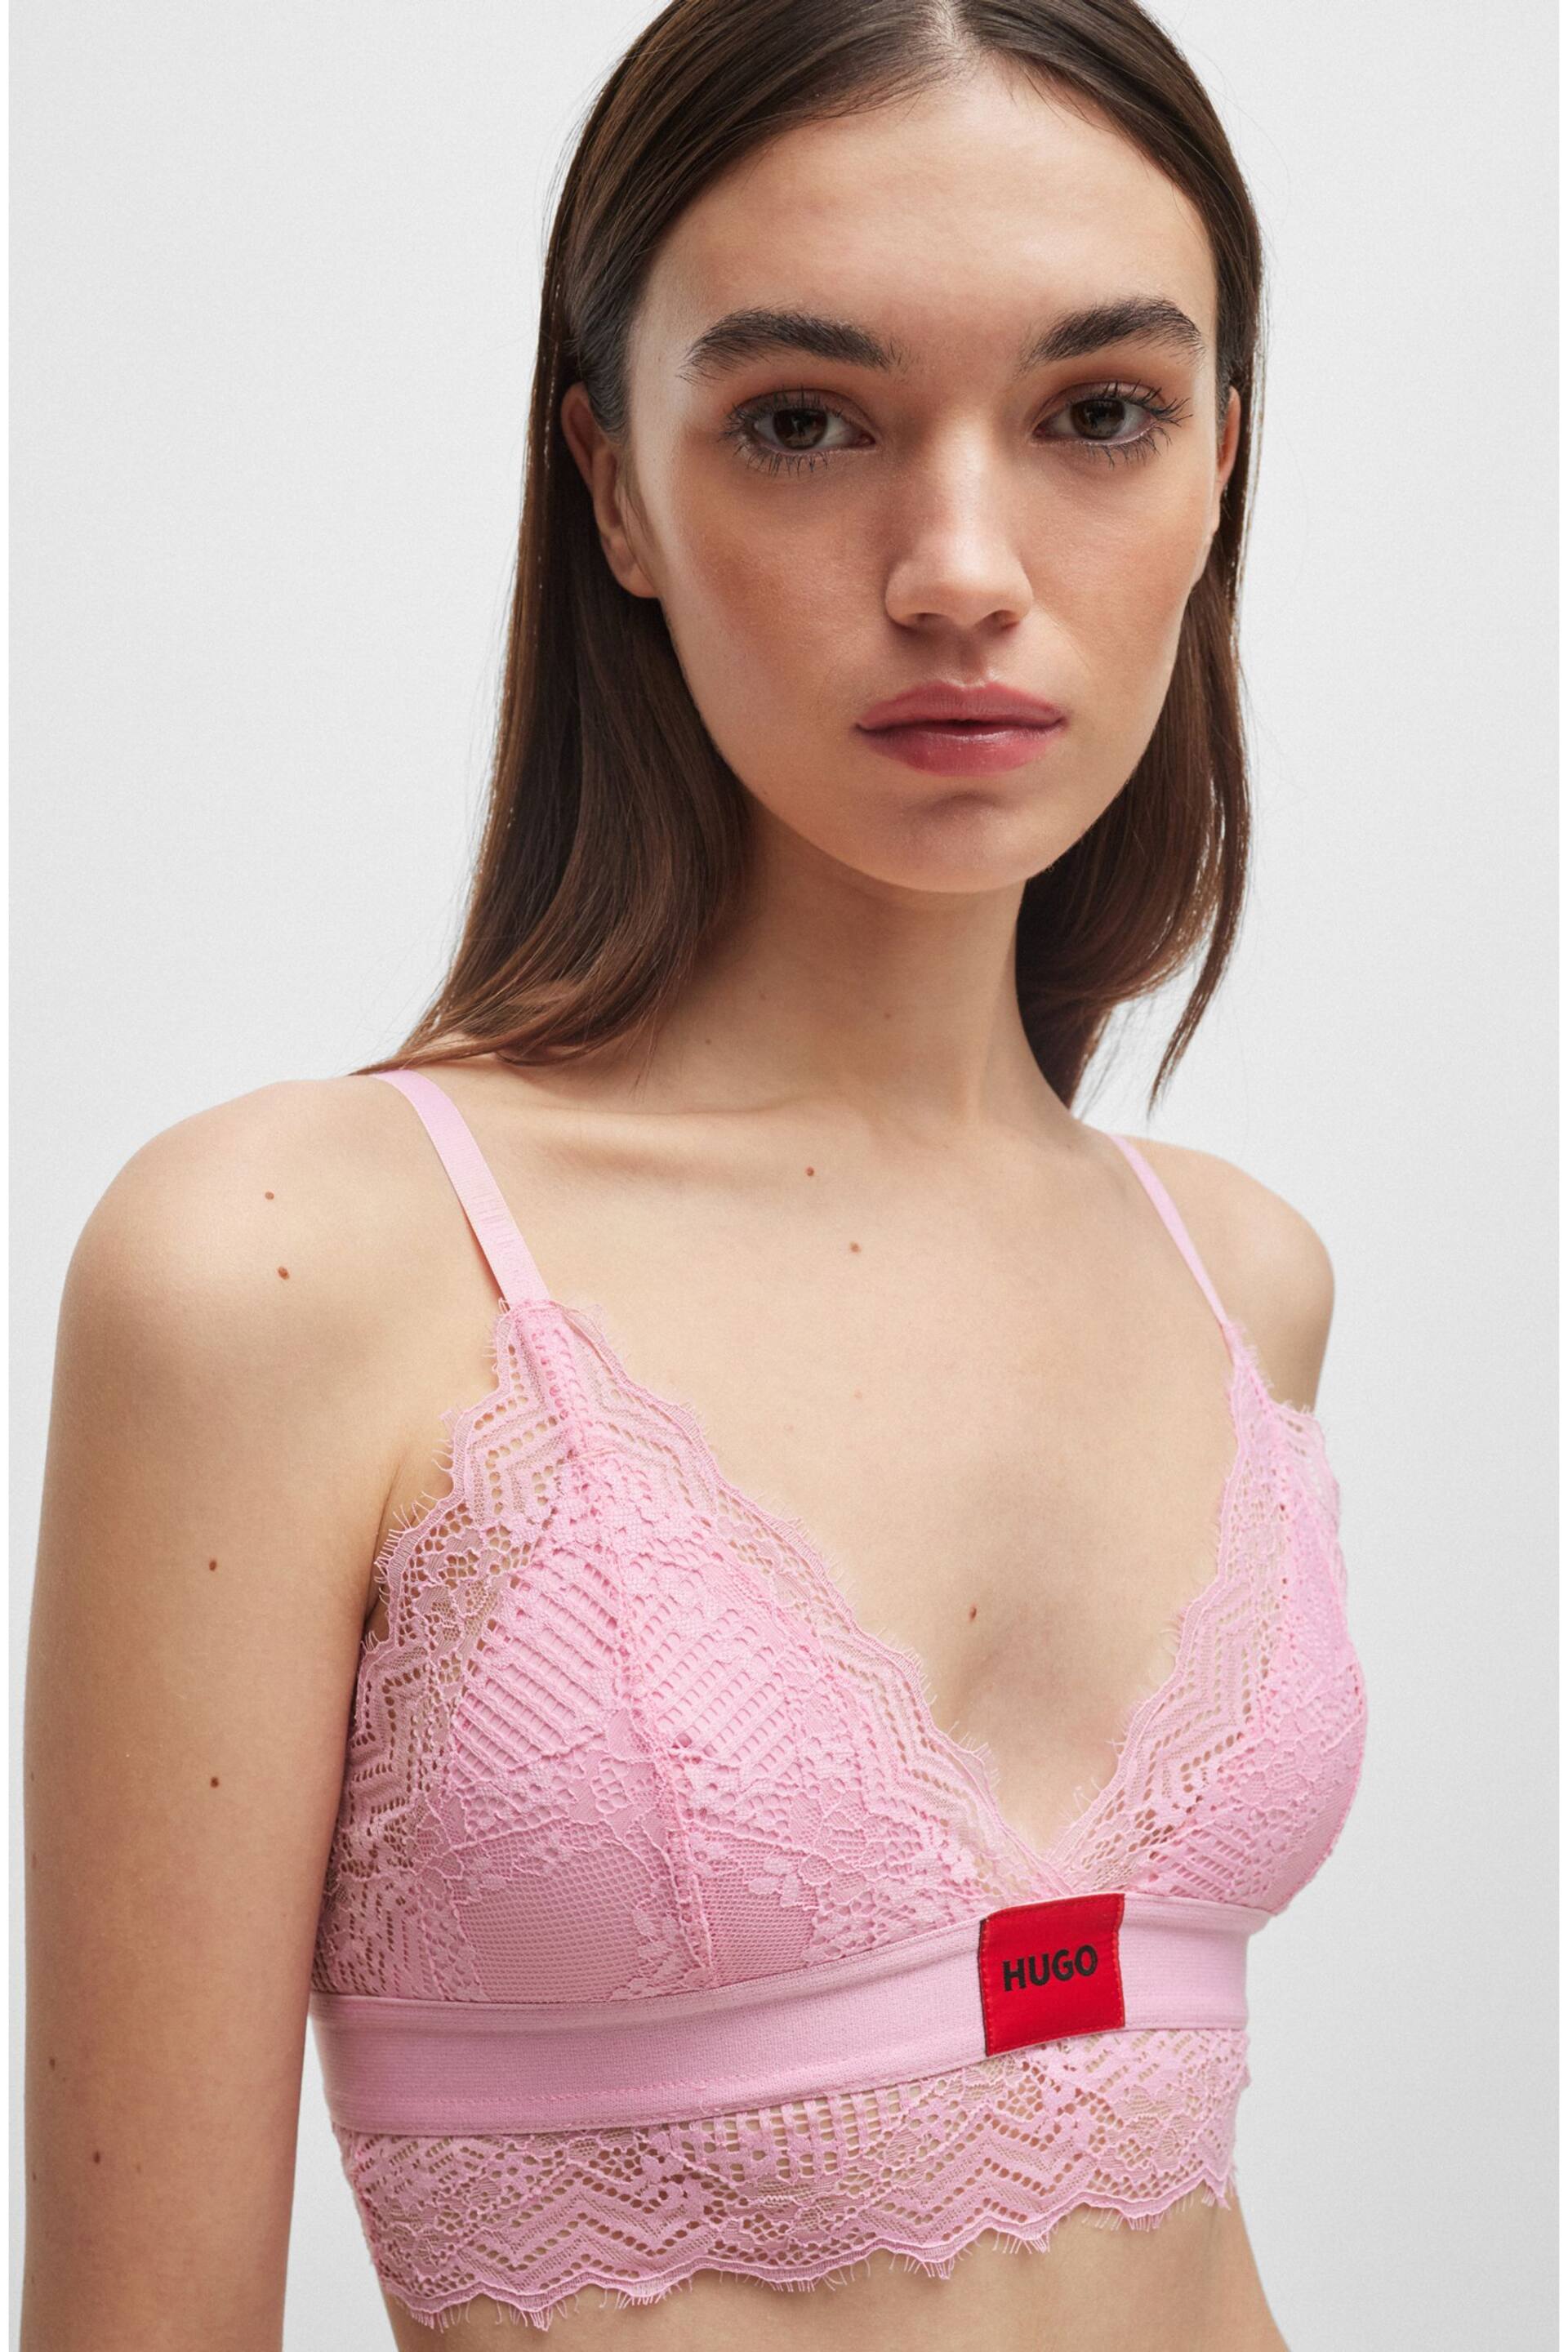 HUGO Pink Padded Triangle Bra in Geometric Lace With Logo Label - Image 1 of 5